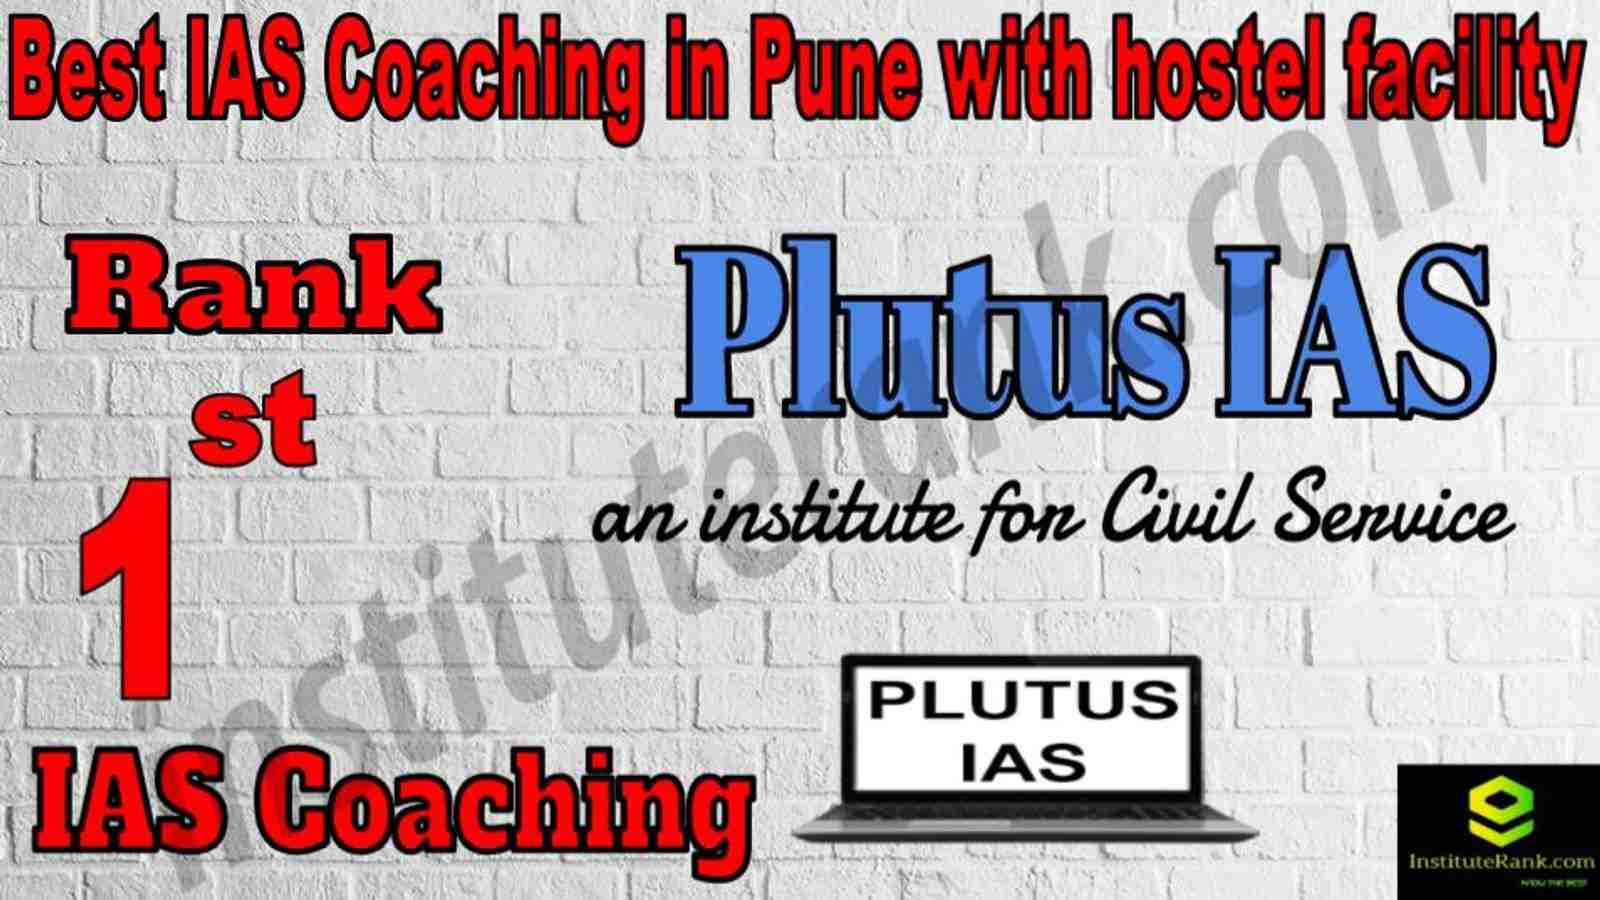 1st Best IAS Coaching in Pune with hostel facility